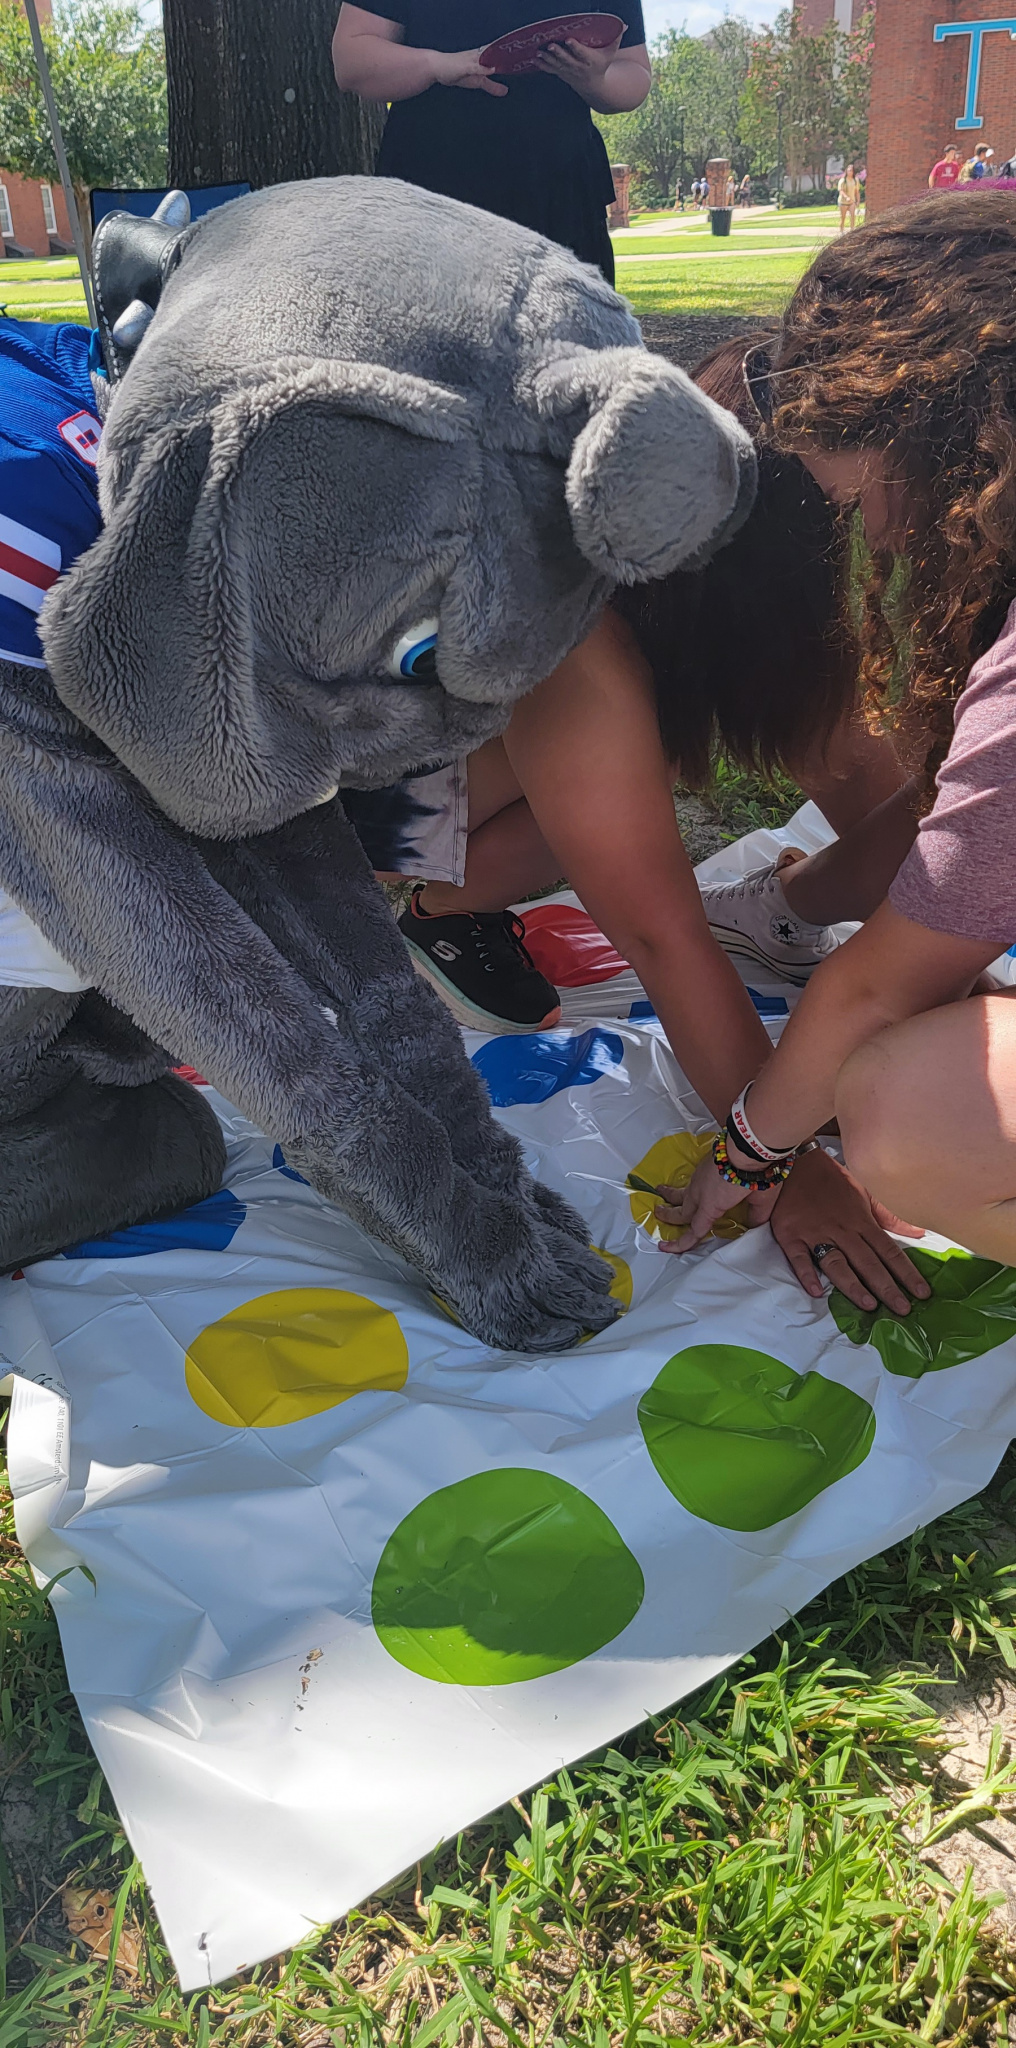 Champ playing Twister provided by Ruston Daily Leader